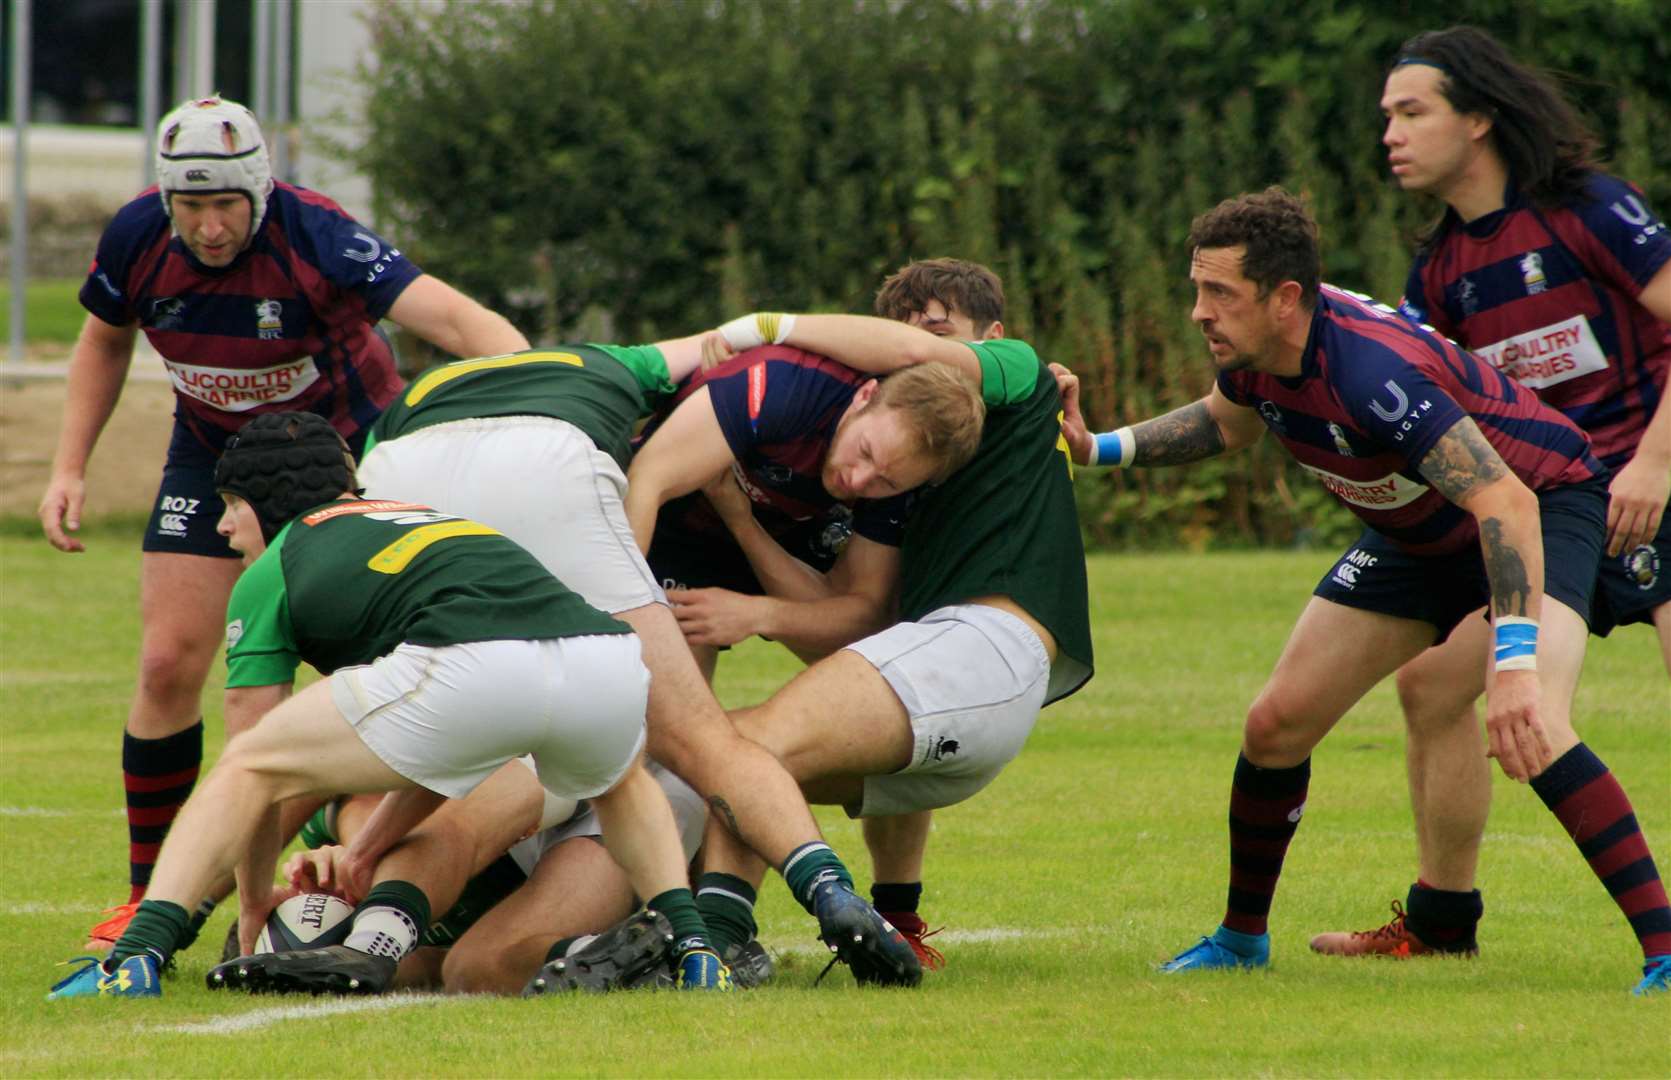 Caithness won 43-3 when Hillfoots visited Millbank on the first day of the season.